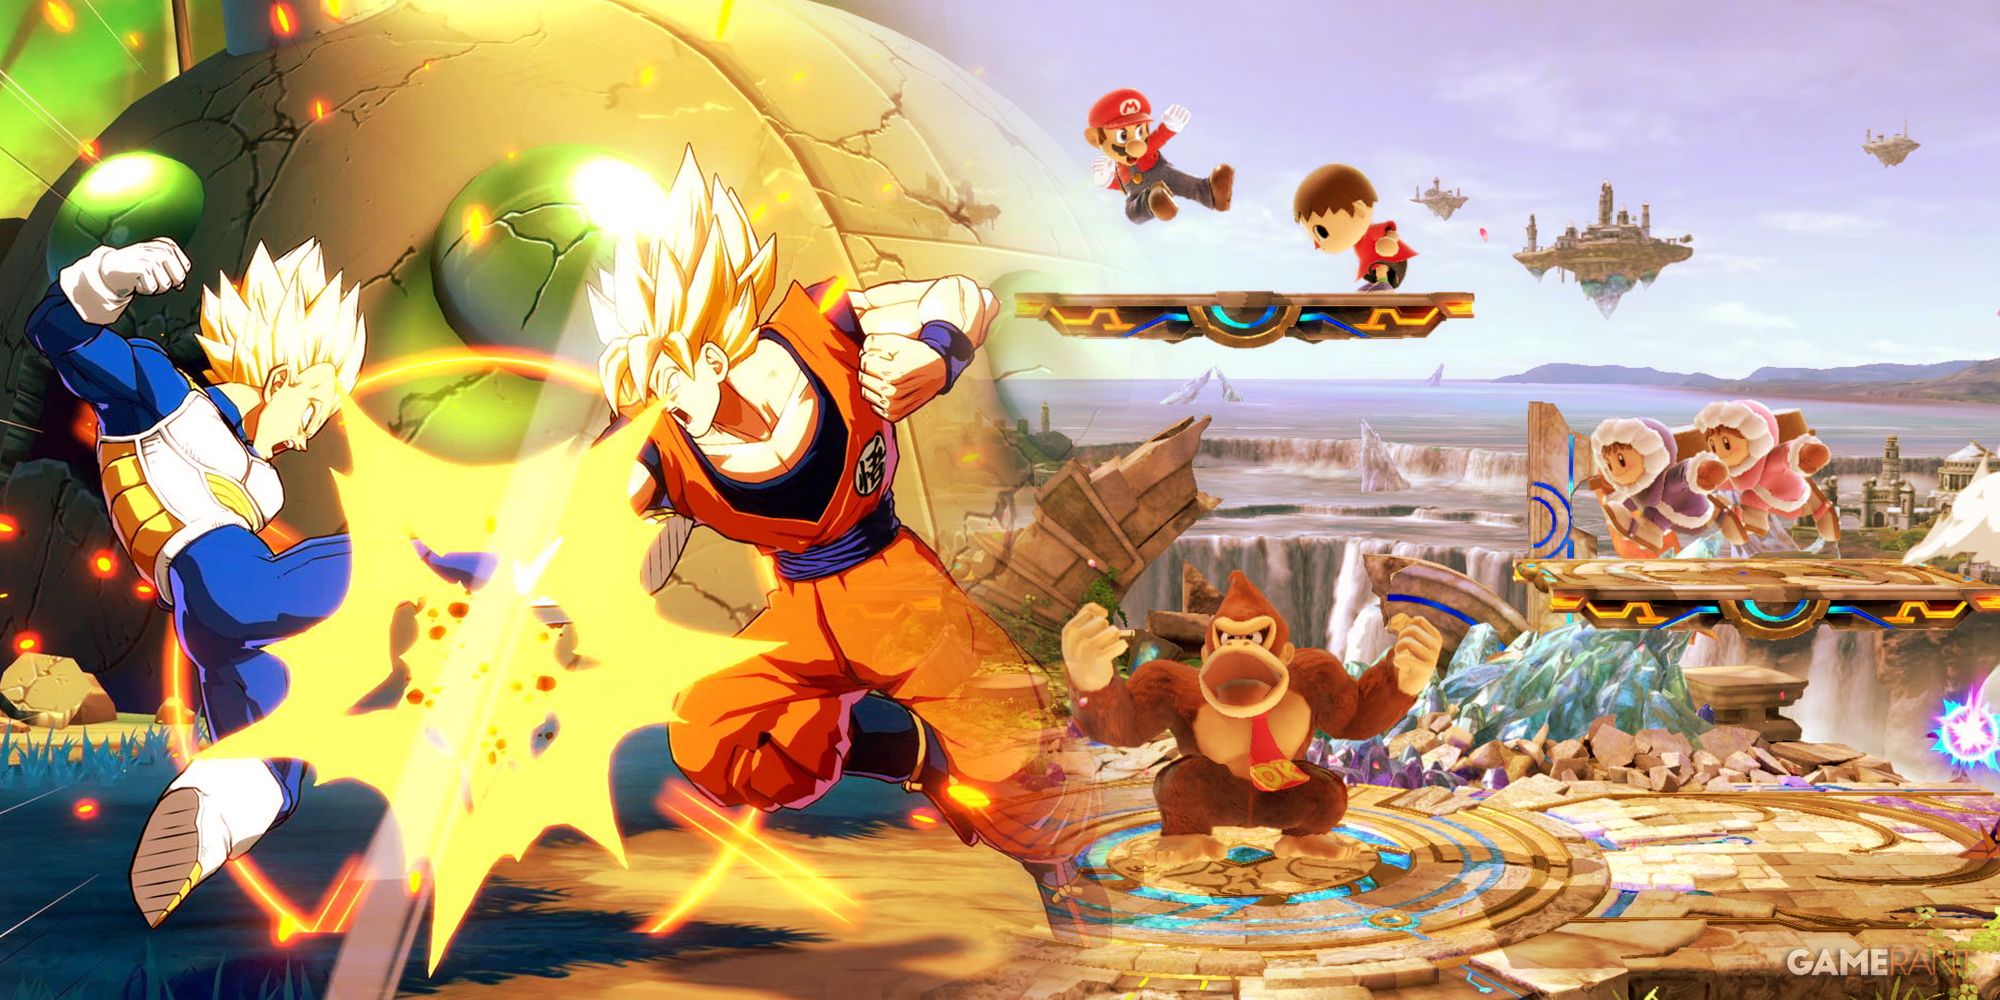 Fighting Games For Co-Op Dragon Ball FighterZ, Super Smash Bros. Ultimate